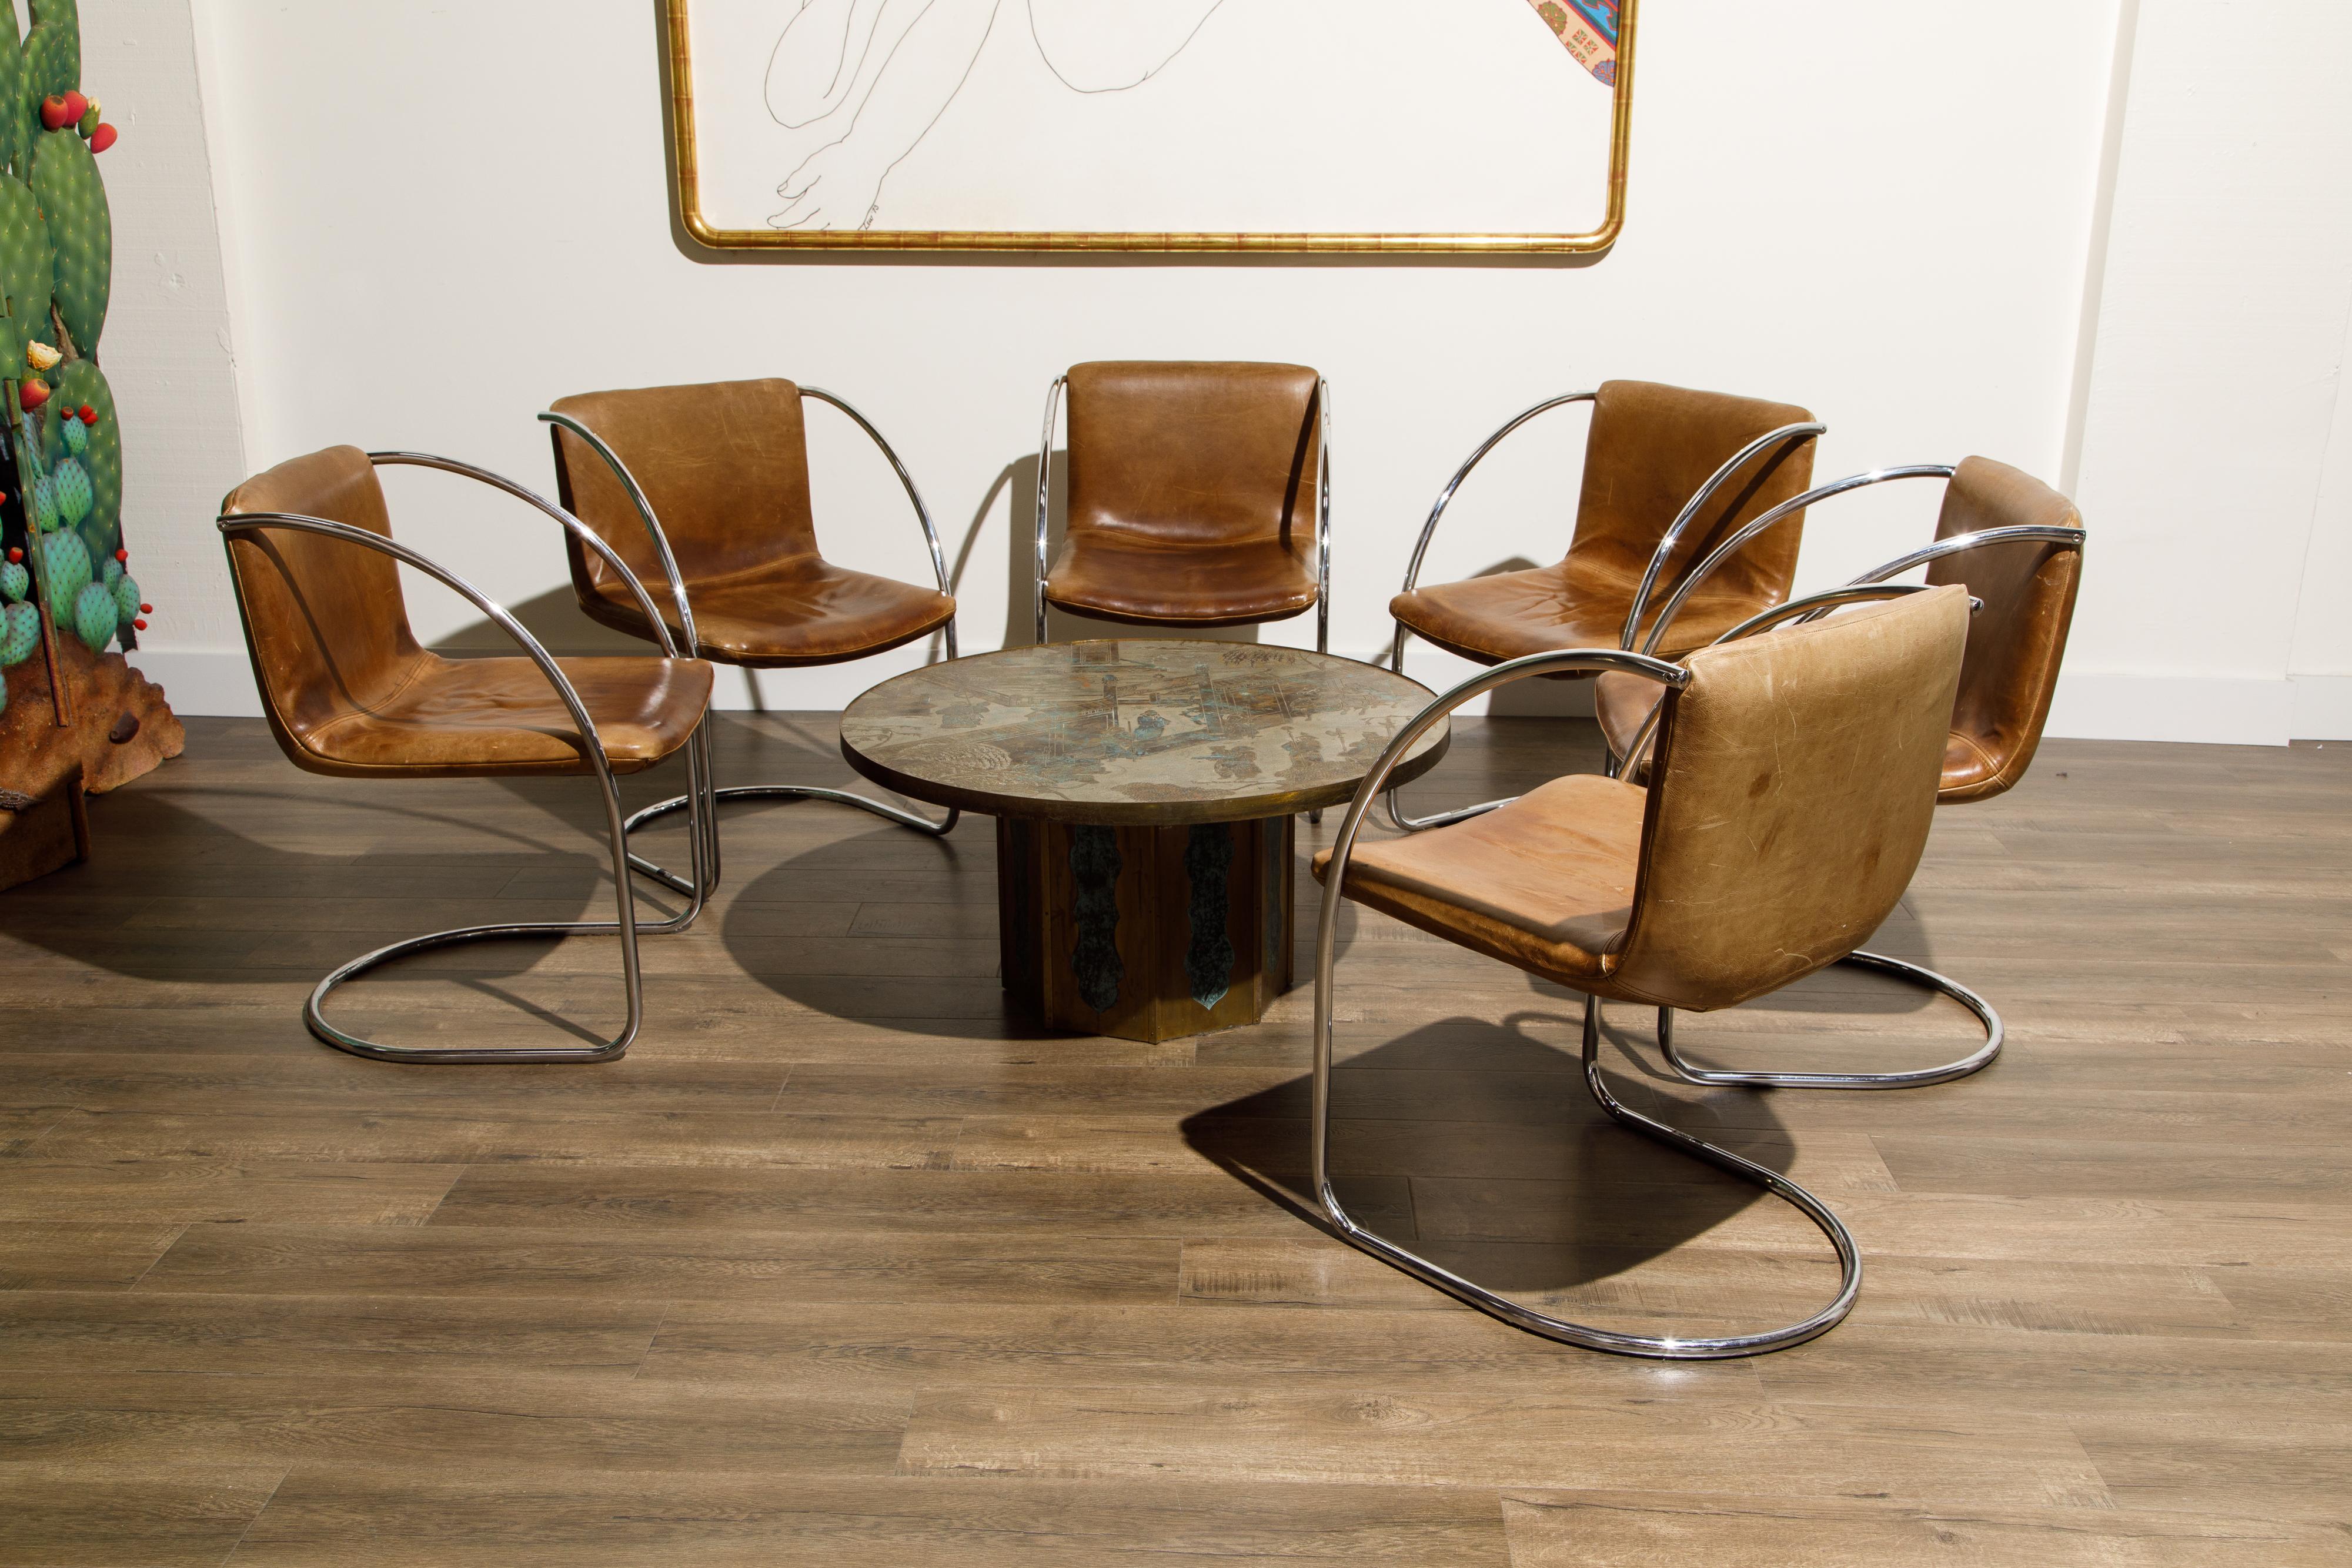 'Lens' Leather Chairs by Giovanni Offredi for Saporiti Italia, c. 1968, Signed 10